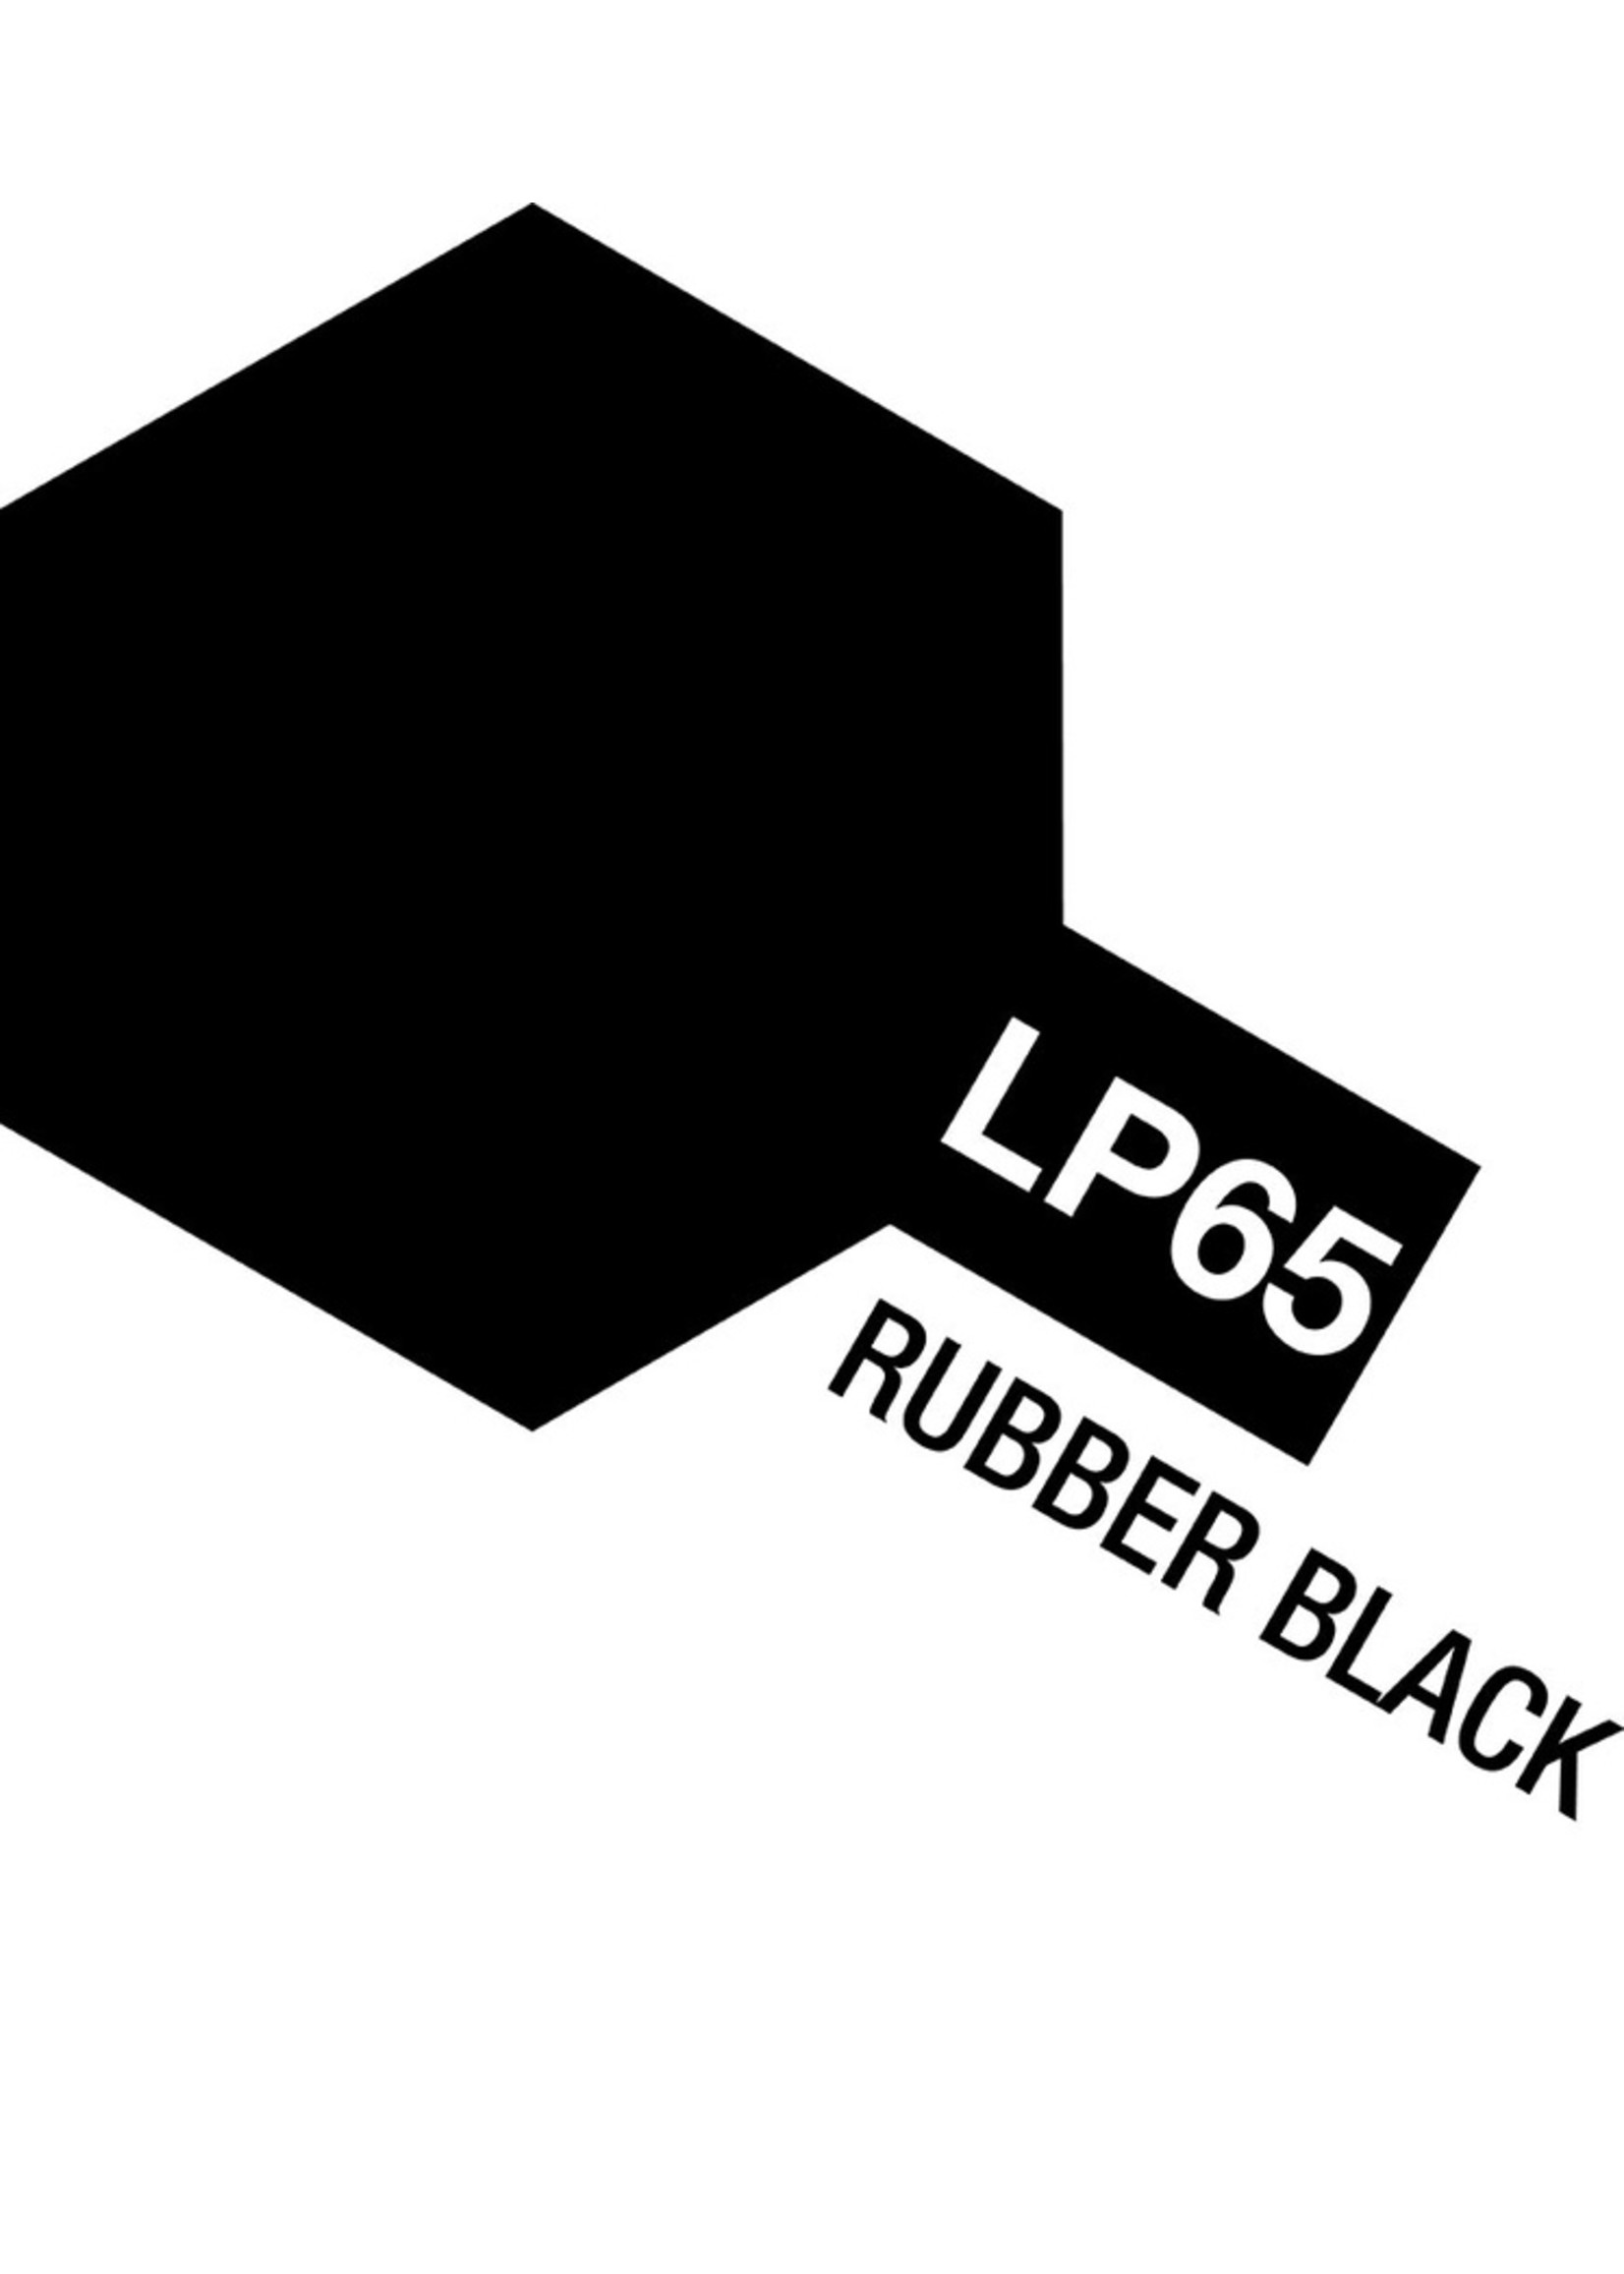 Tamiya 82165 - LP-65 Rubber Black Lacquer Paint 10ml